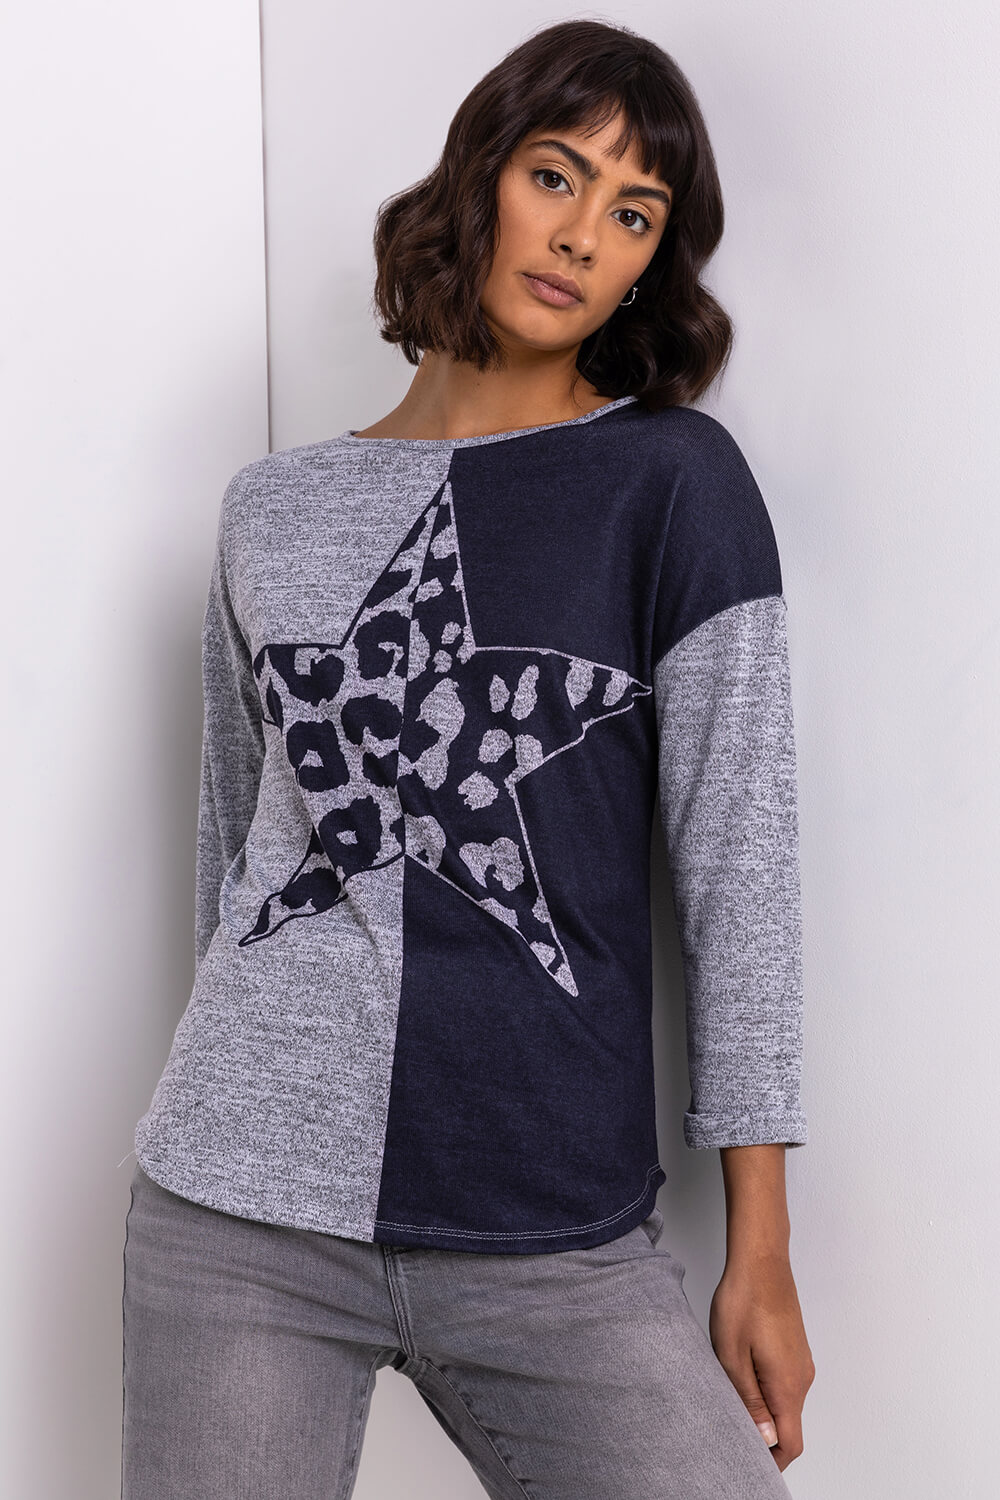 Navy  Contrast Animal Print Soft Knit Jersey Top, Image 4 of 4